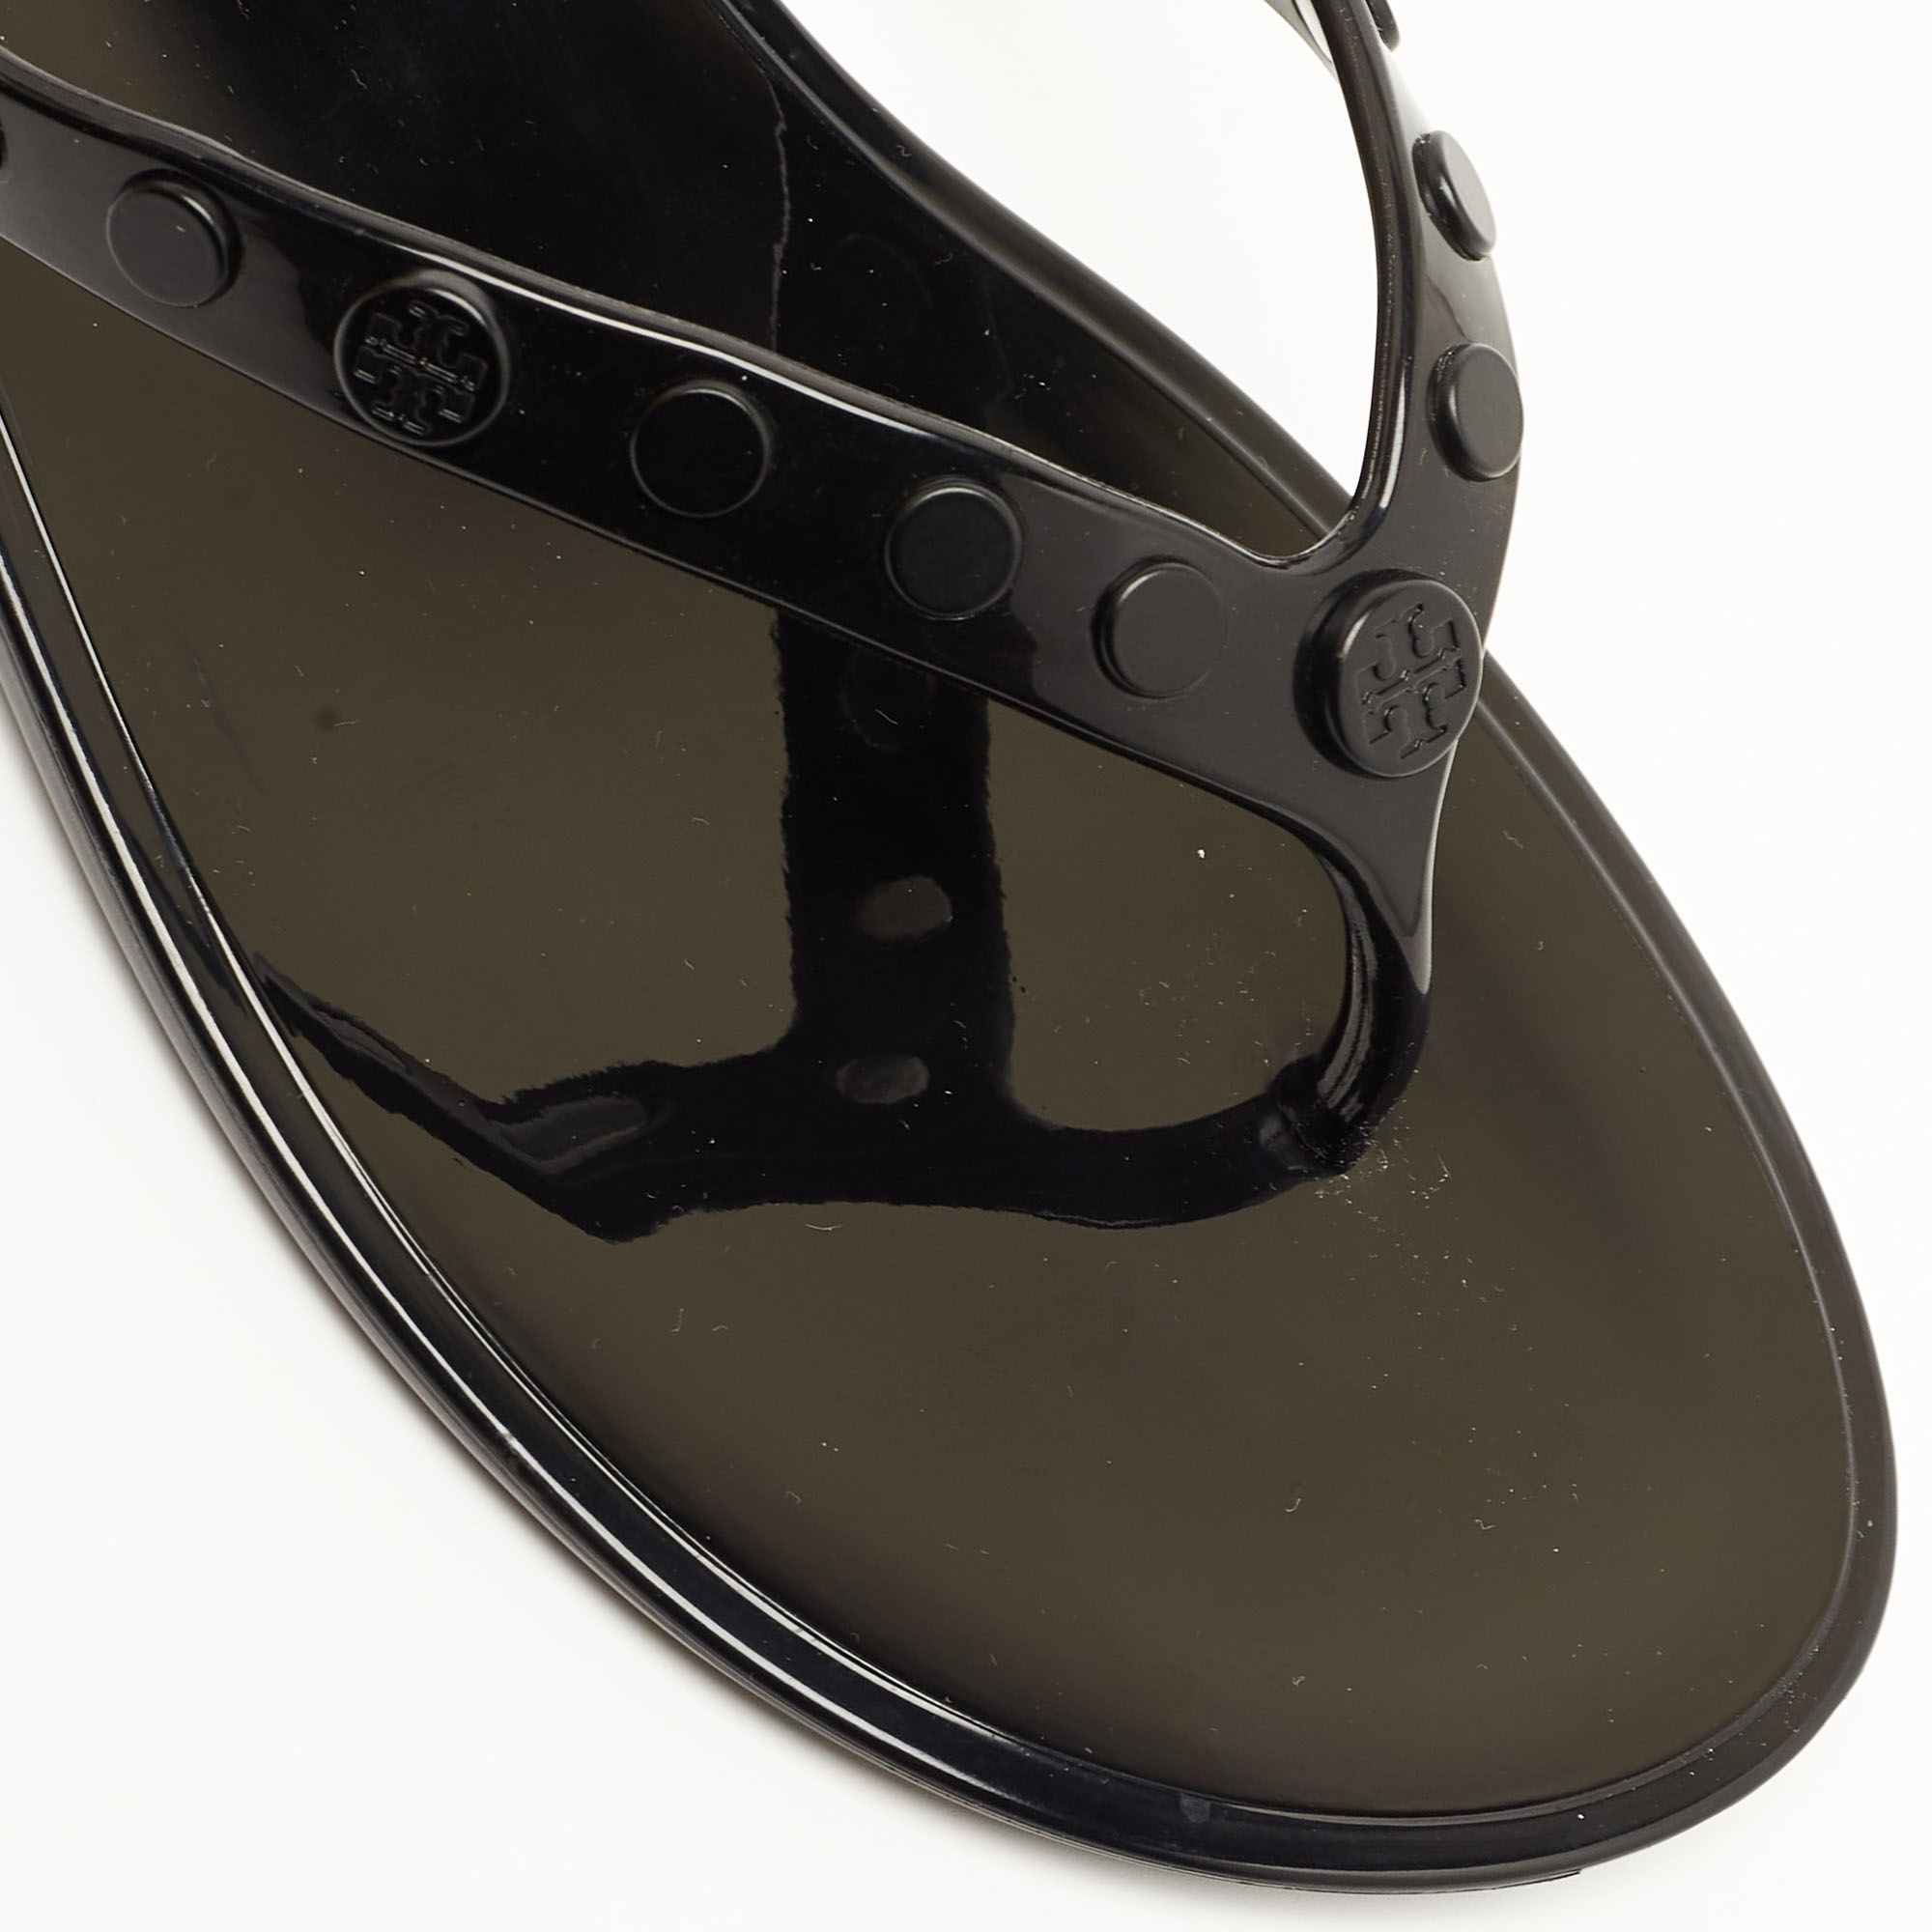 Tory Burch Black Rubber Studded Thong Flats Size 38.5